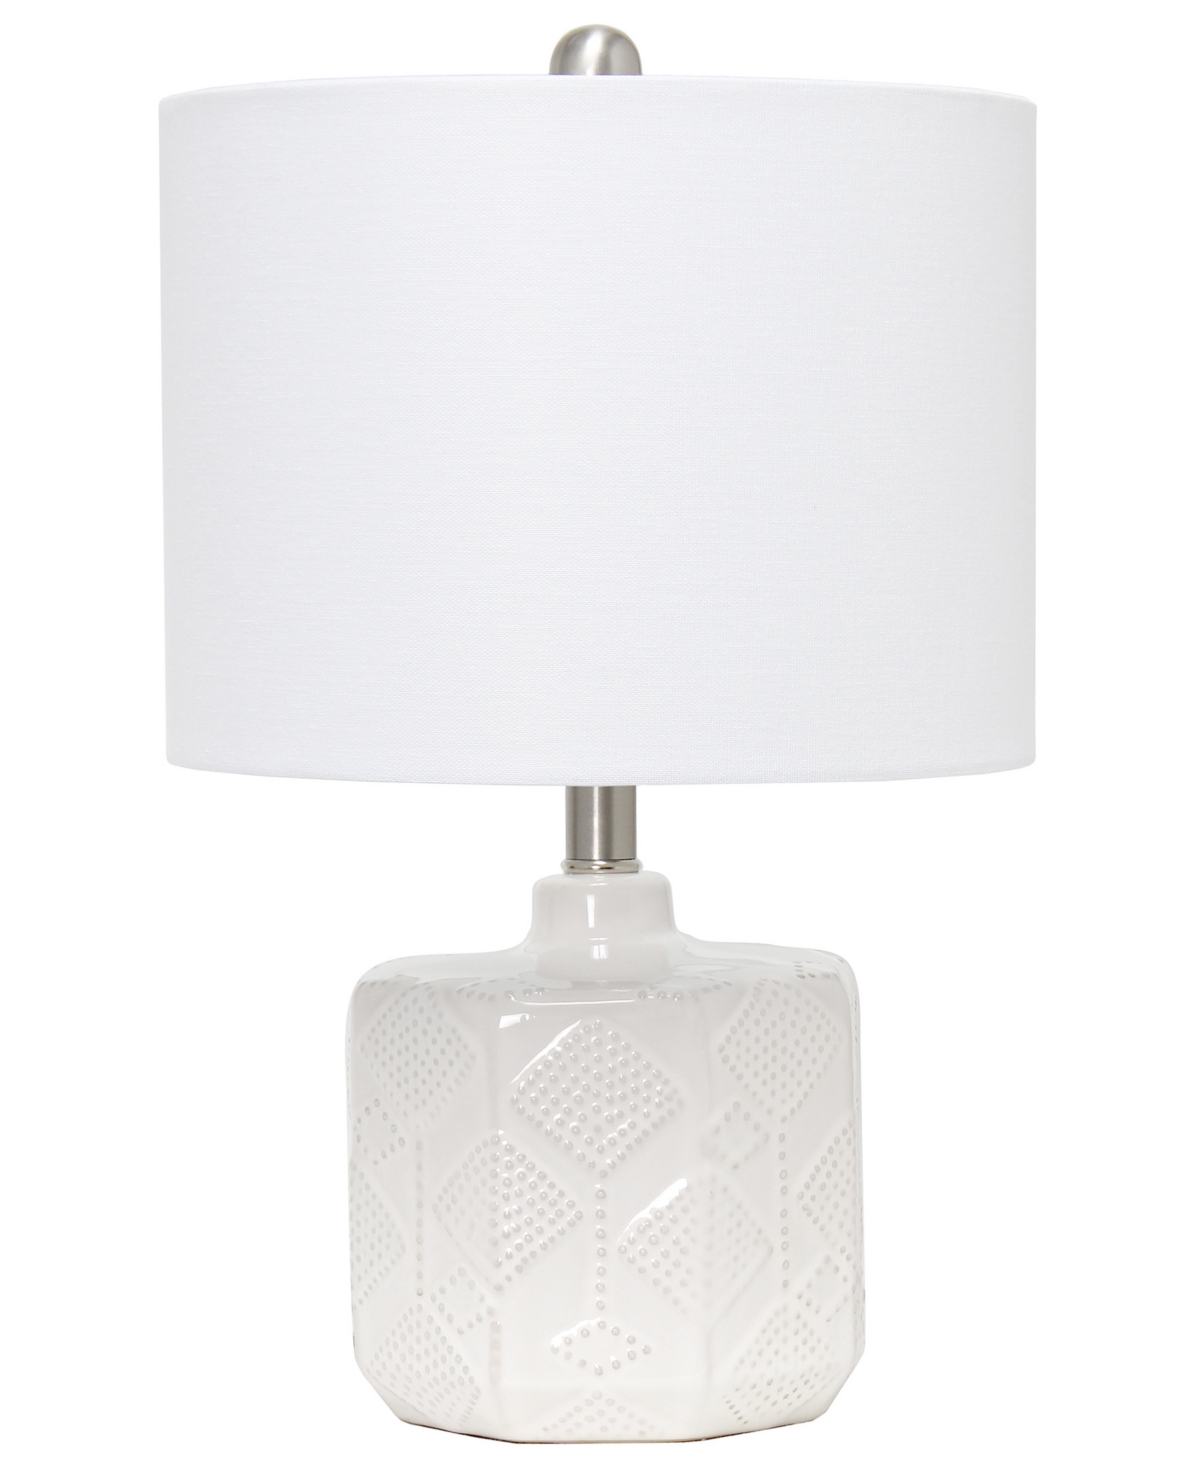 All The Rages 19" Contemporary Bohemian Ceramic Eyelet Pattern Floral Textured Bedside Table Lamp With White Fabri In Off White